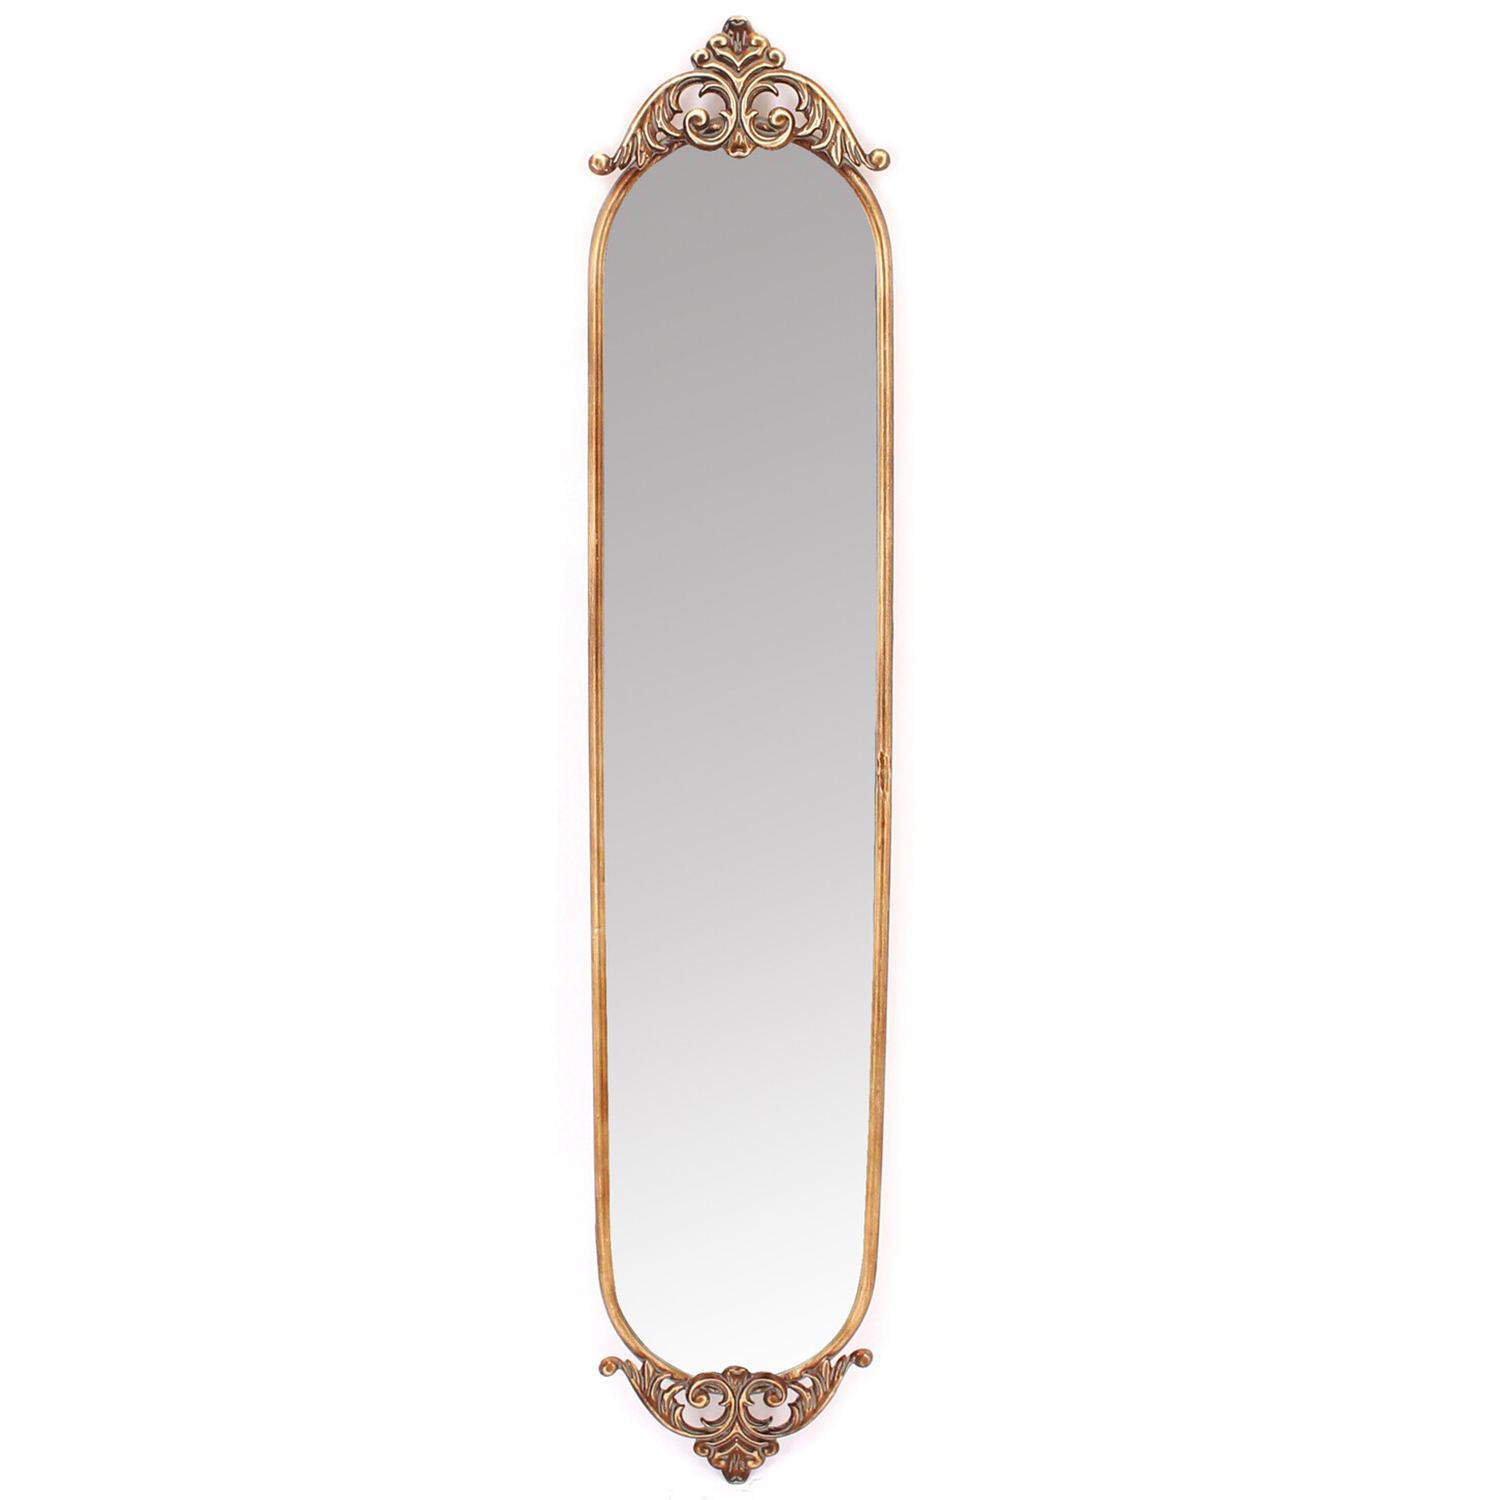 Majestic Gold Antique Oval Wall Mirror 105 x 21cm Image